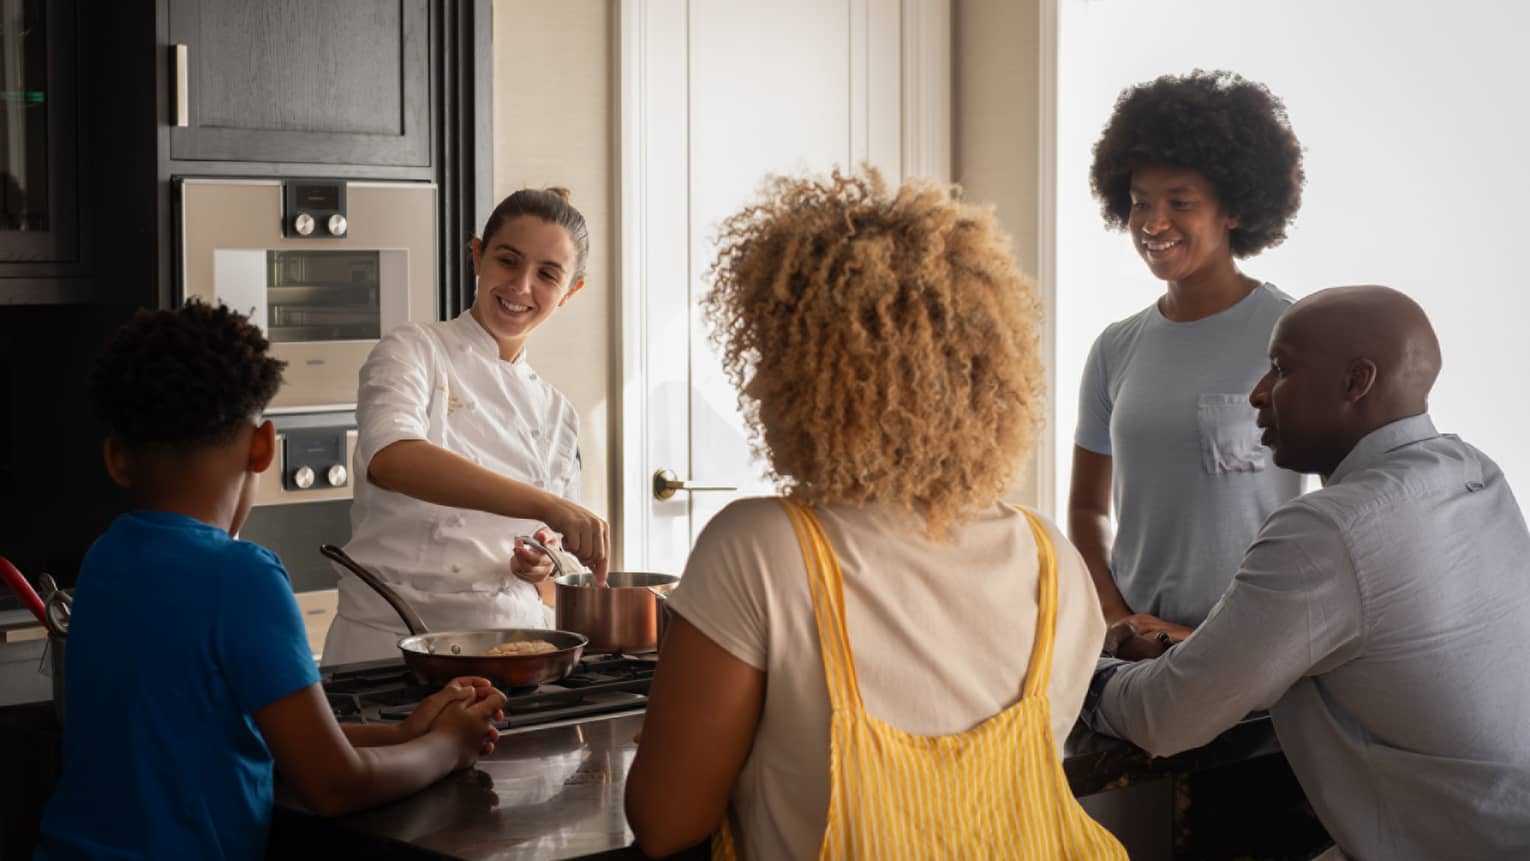 A family of four gathers around a kitchen-island cooktop watching a smiling chef prepare food in copper cookware. 